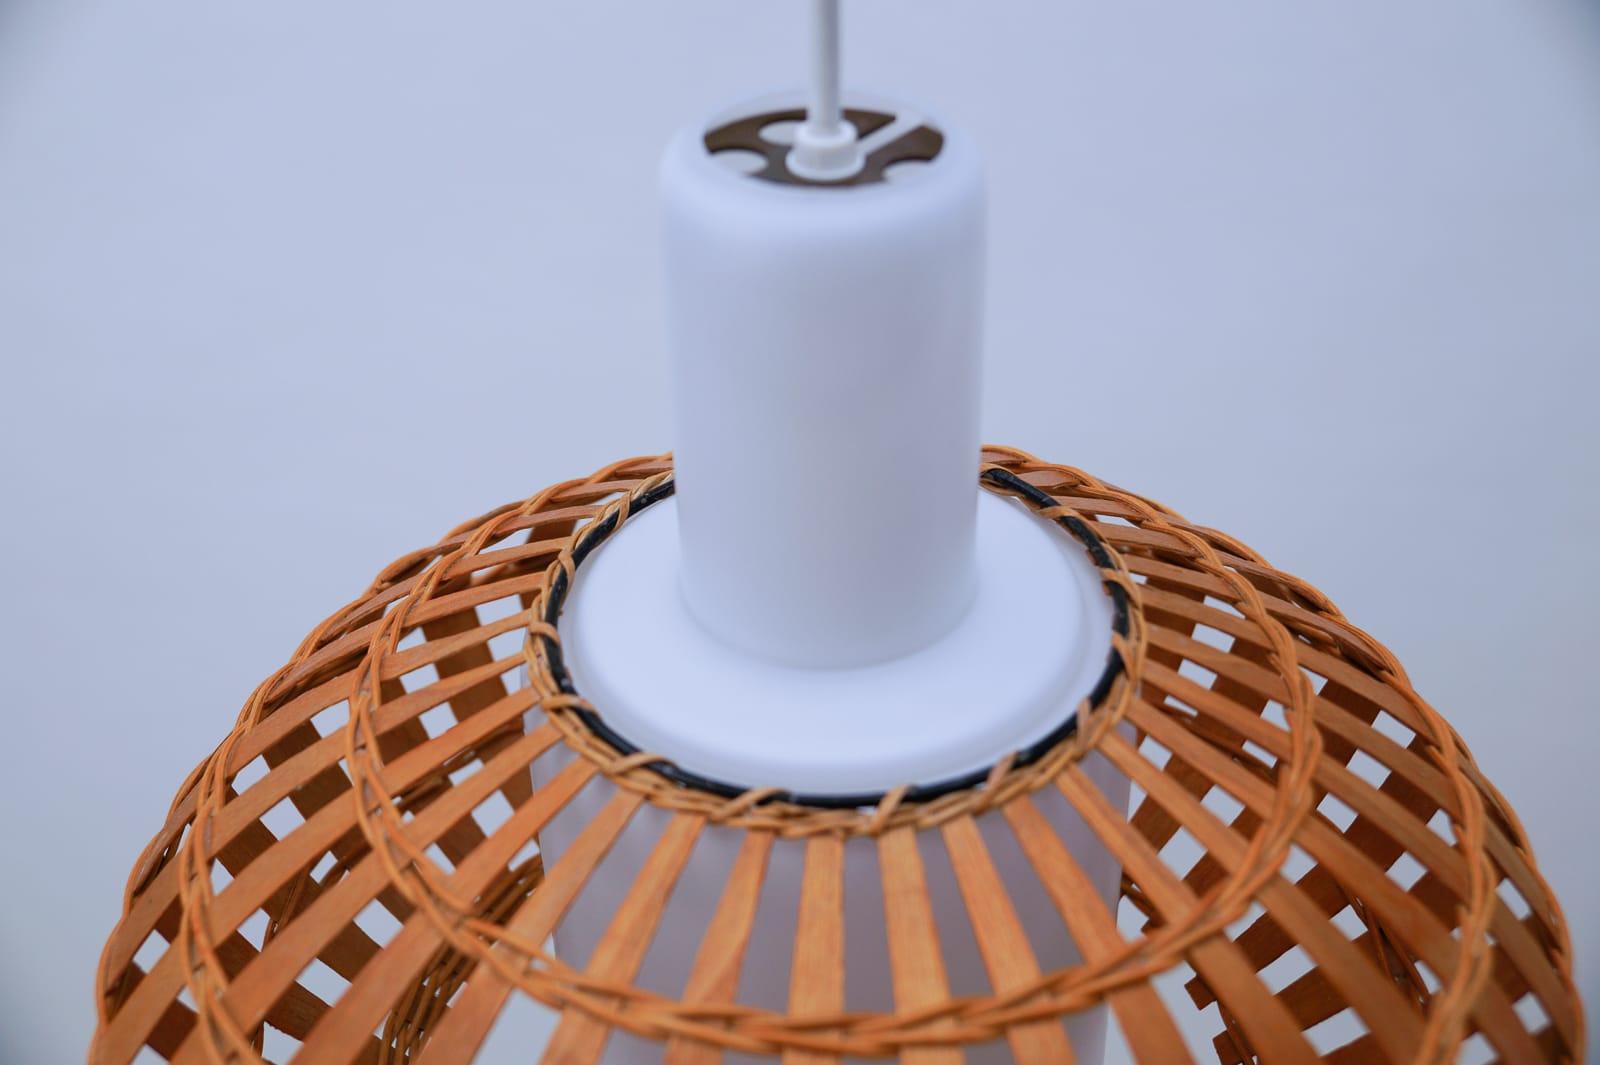 Opaline Glass and Wicker Ceiling Lamp, 1960s For Sale 2